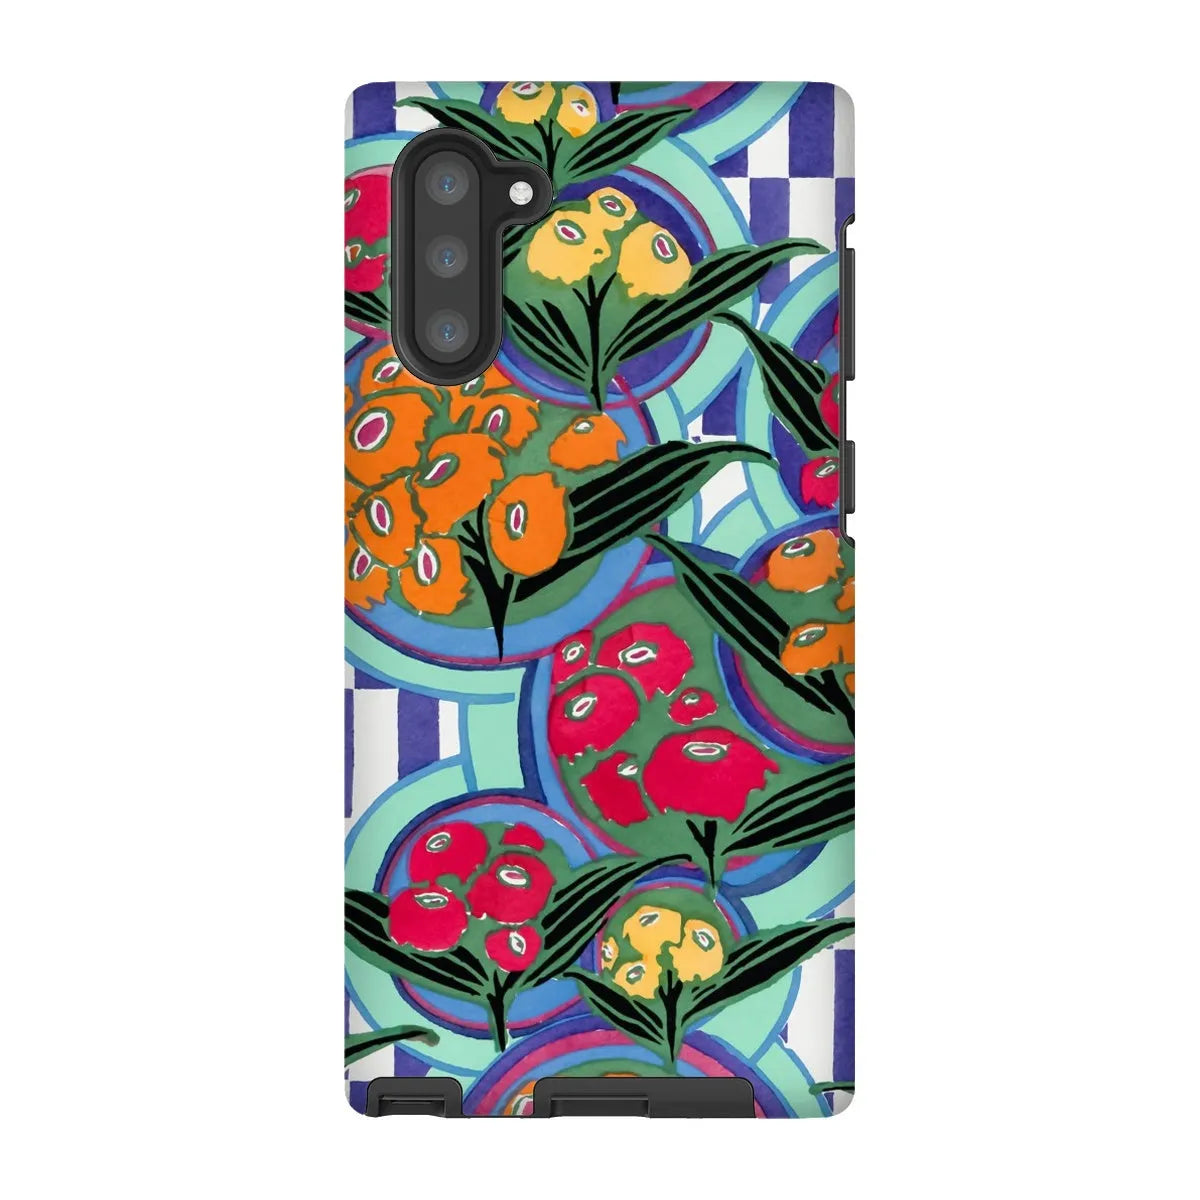 Vibrant Floral Aesthetic Art Phone Case - E.a. Séguy - Samsung Galaxy Note 10 / Matte - Mobile Phone Cases - Aesthetic